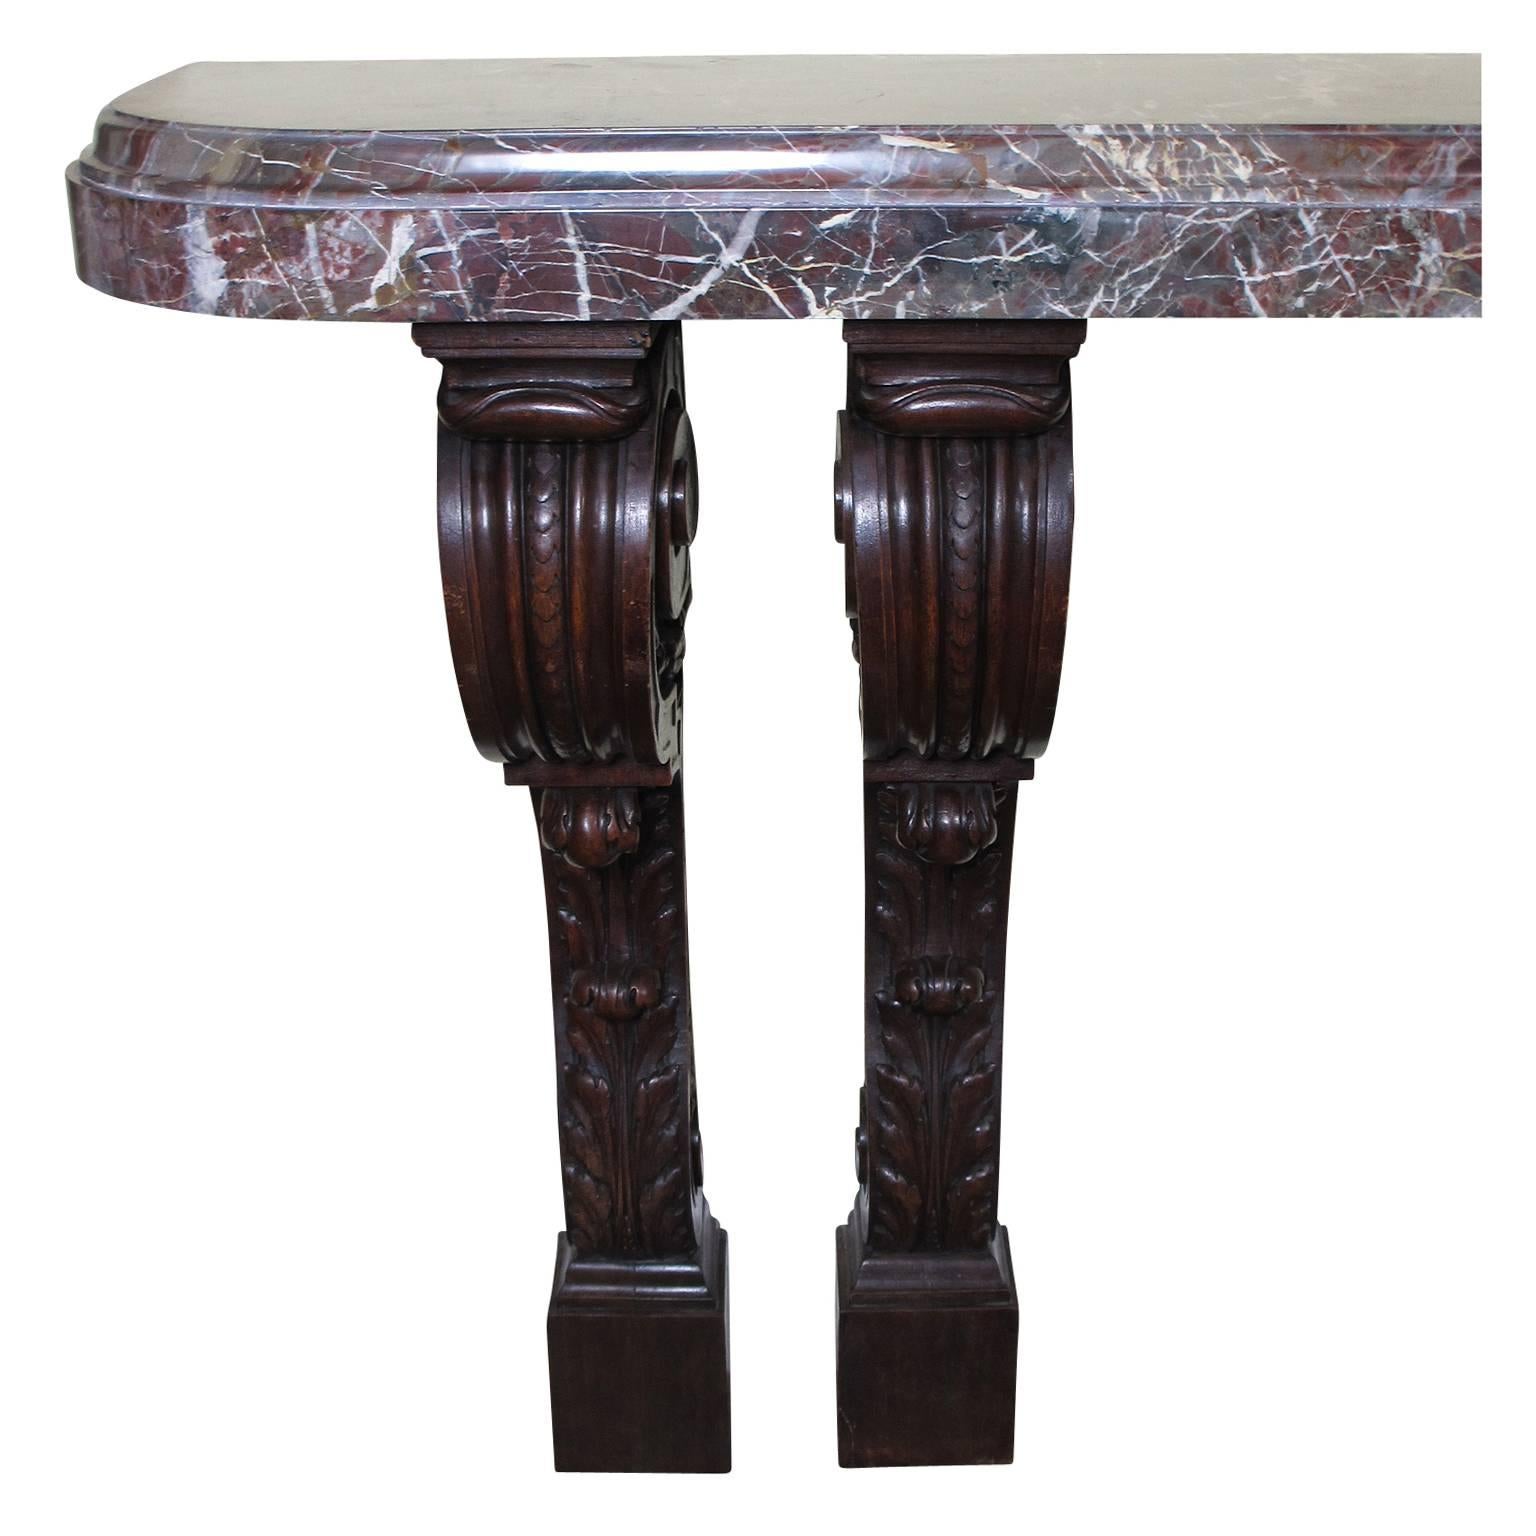 A fine and large French 19th century Louis XV style barroque carved walnut wall console table with marble top. The four individual scrolled and carved walnut pedestals support the large and 4 inch (10.2 cm) thick Italian Rosso Levanto demilune